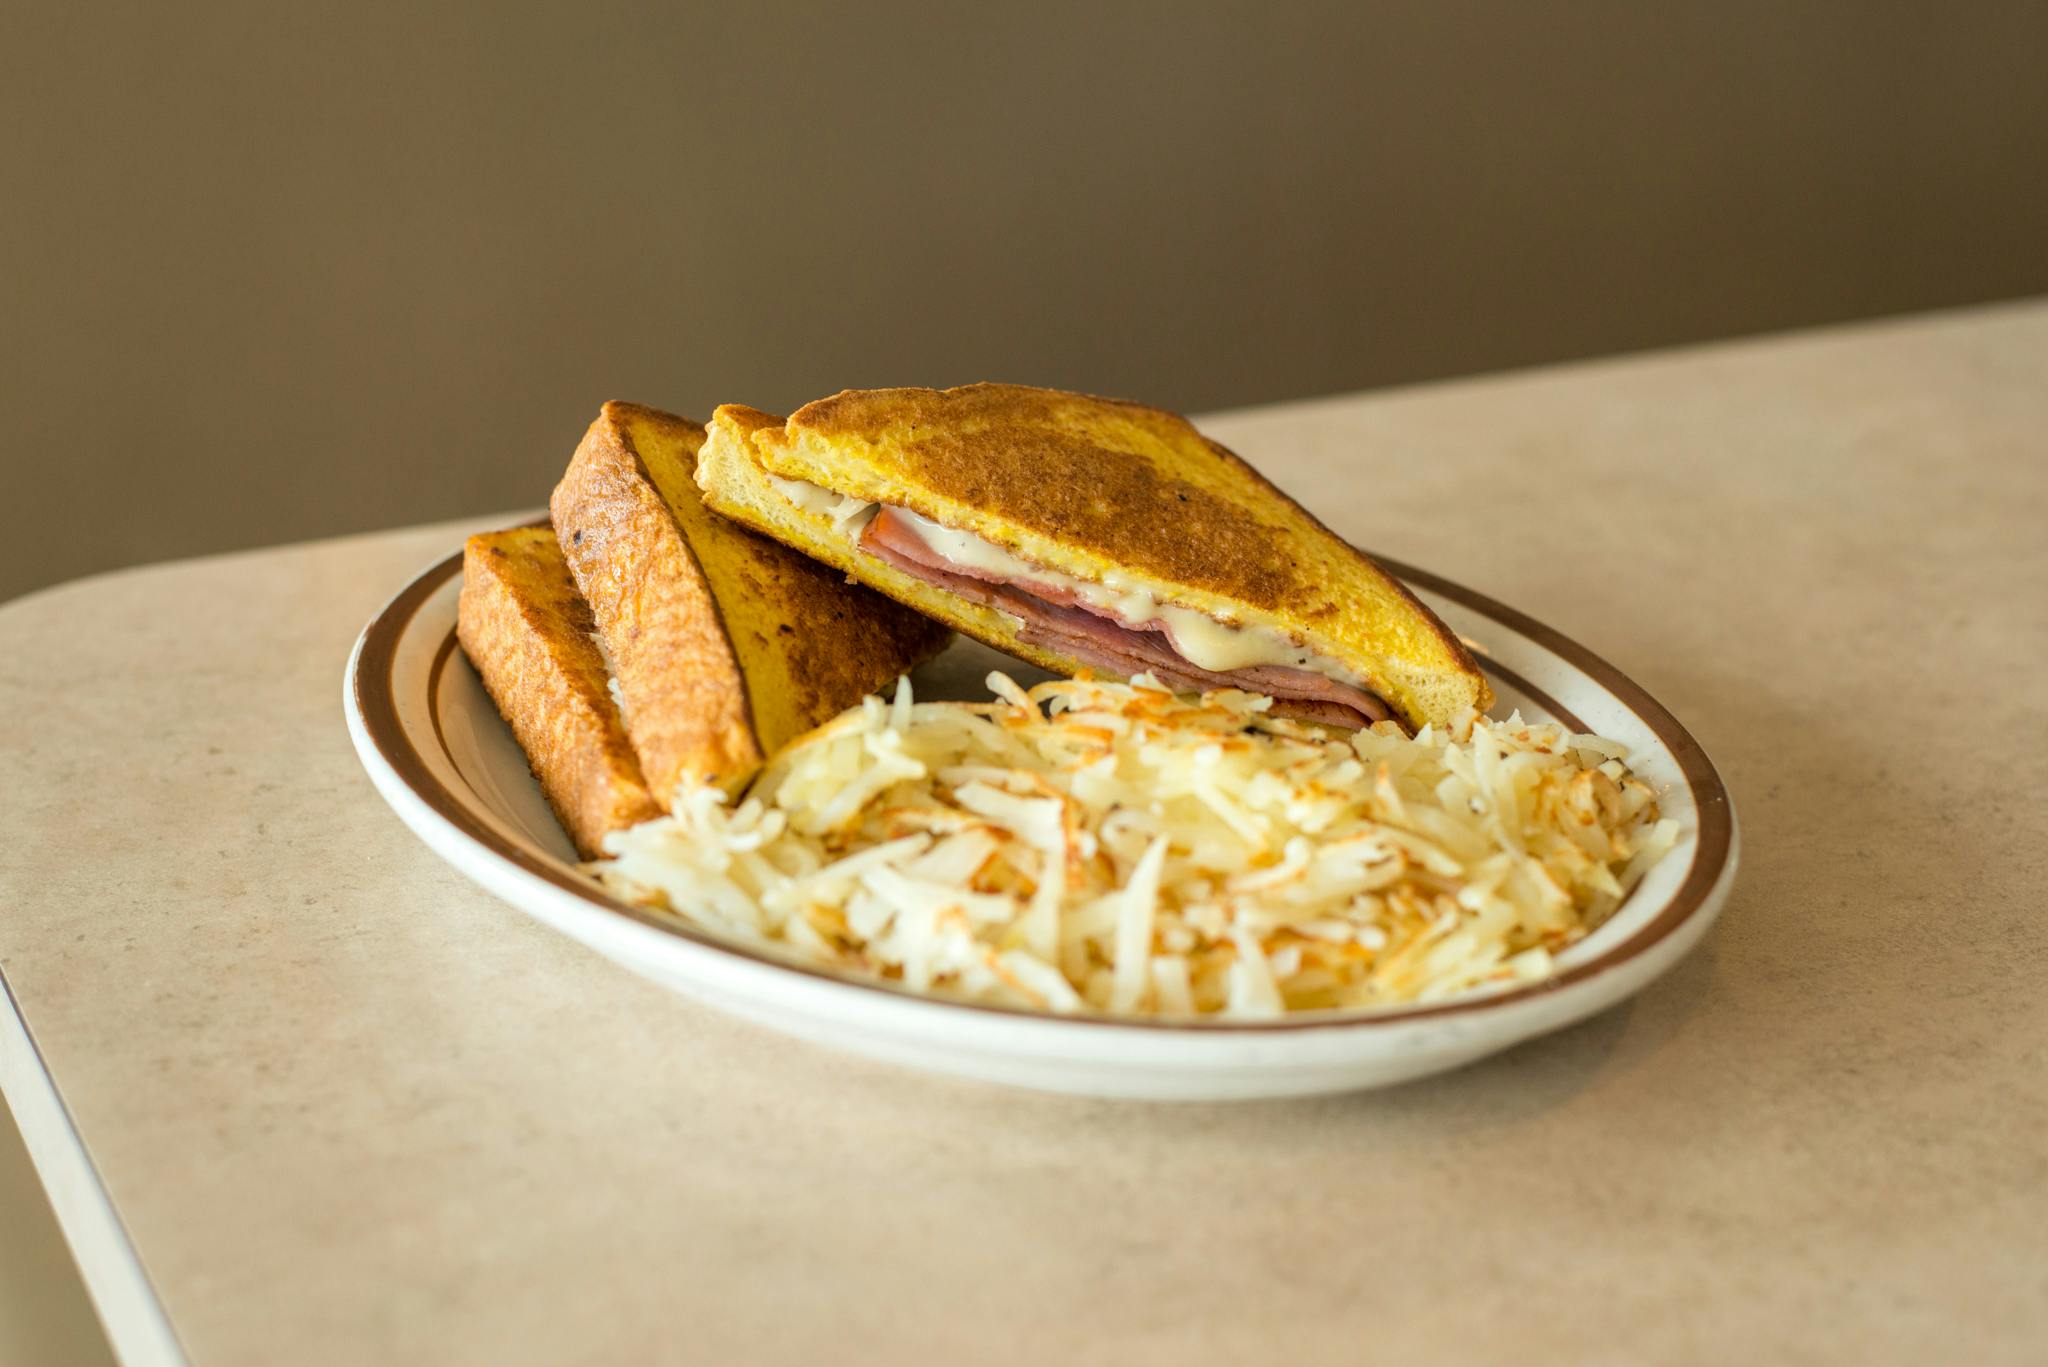 Monte Cristo Sandwich Breakfast from The Pancake Place in Green Bay, WI